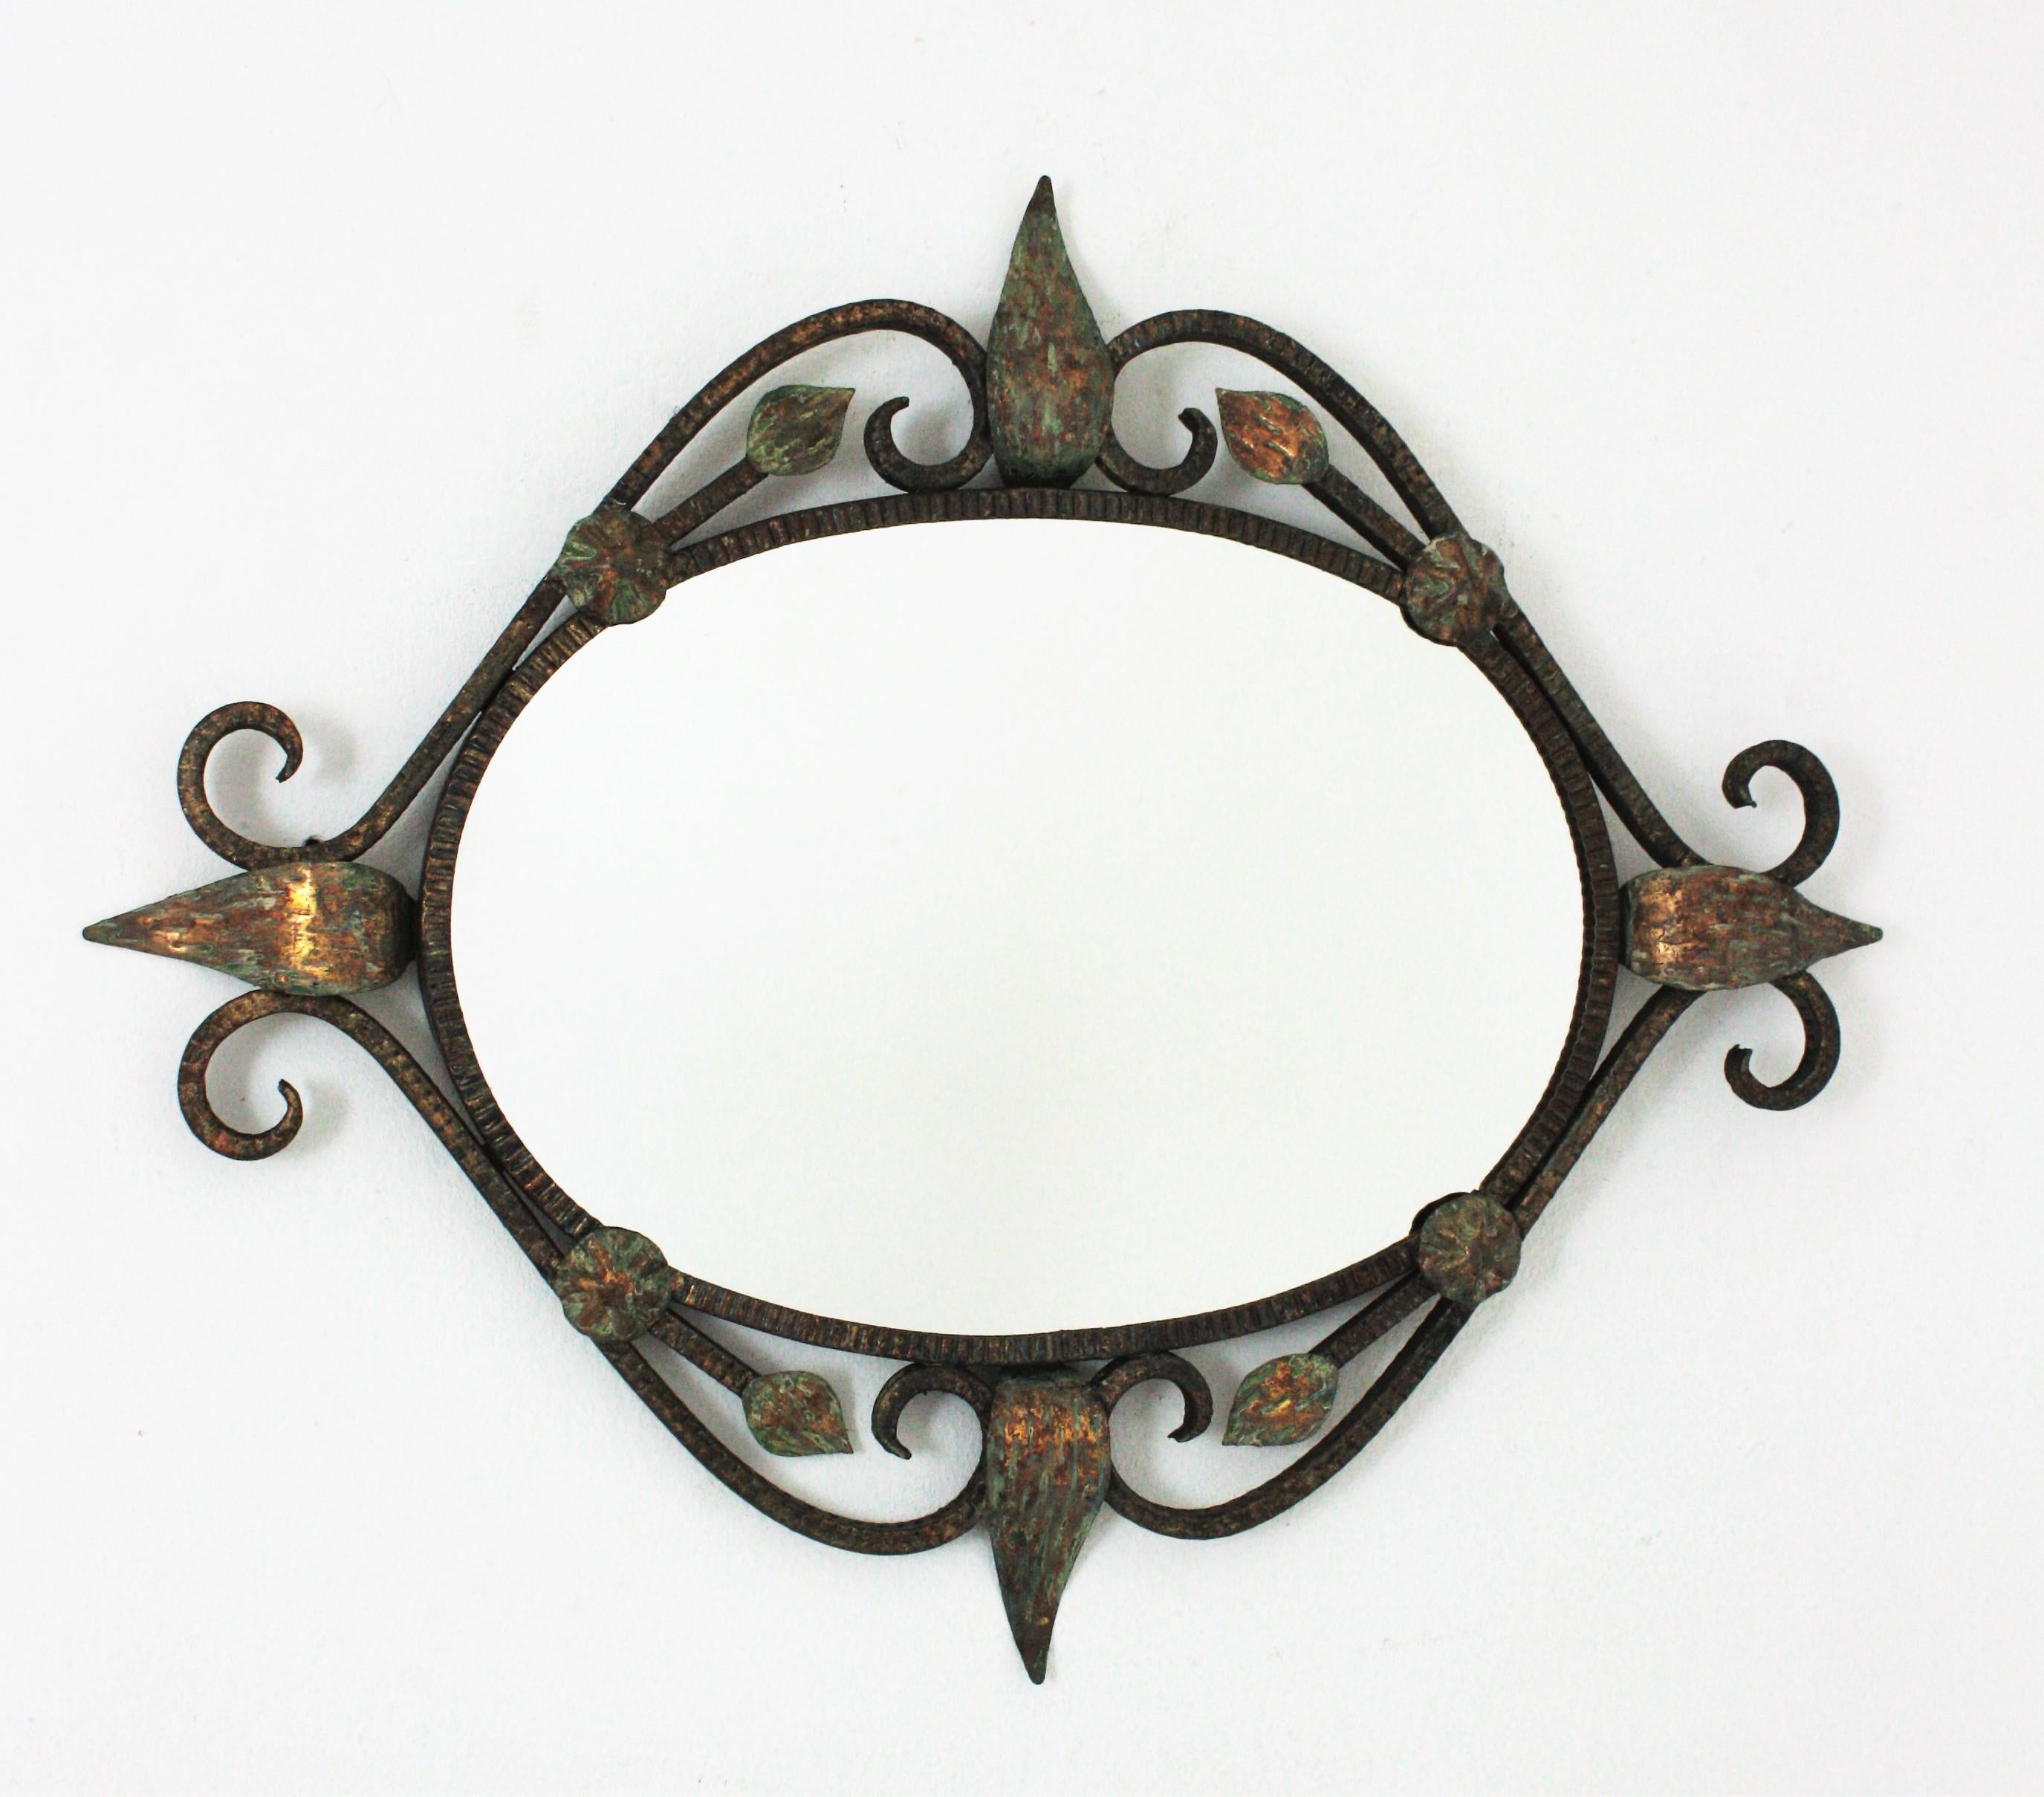 Parcel-Gilt wrought iron oval mirror with scroll and leaves details, France, 1940s.
Beautiful design and terrific aged patina showing rests of the orgininal gold leaf gilding with green accents.
Measures: 74 cm H x 60 cm W x 5 cm D 
Glass